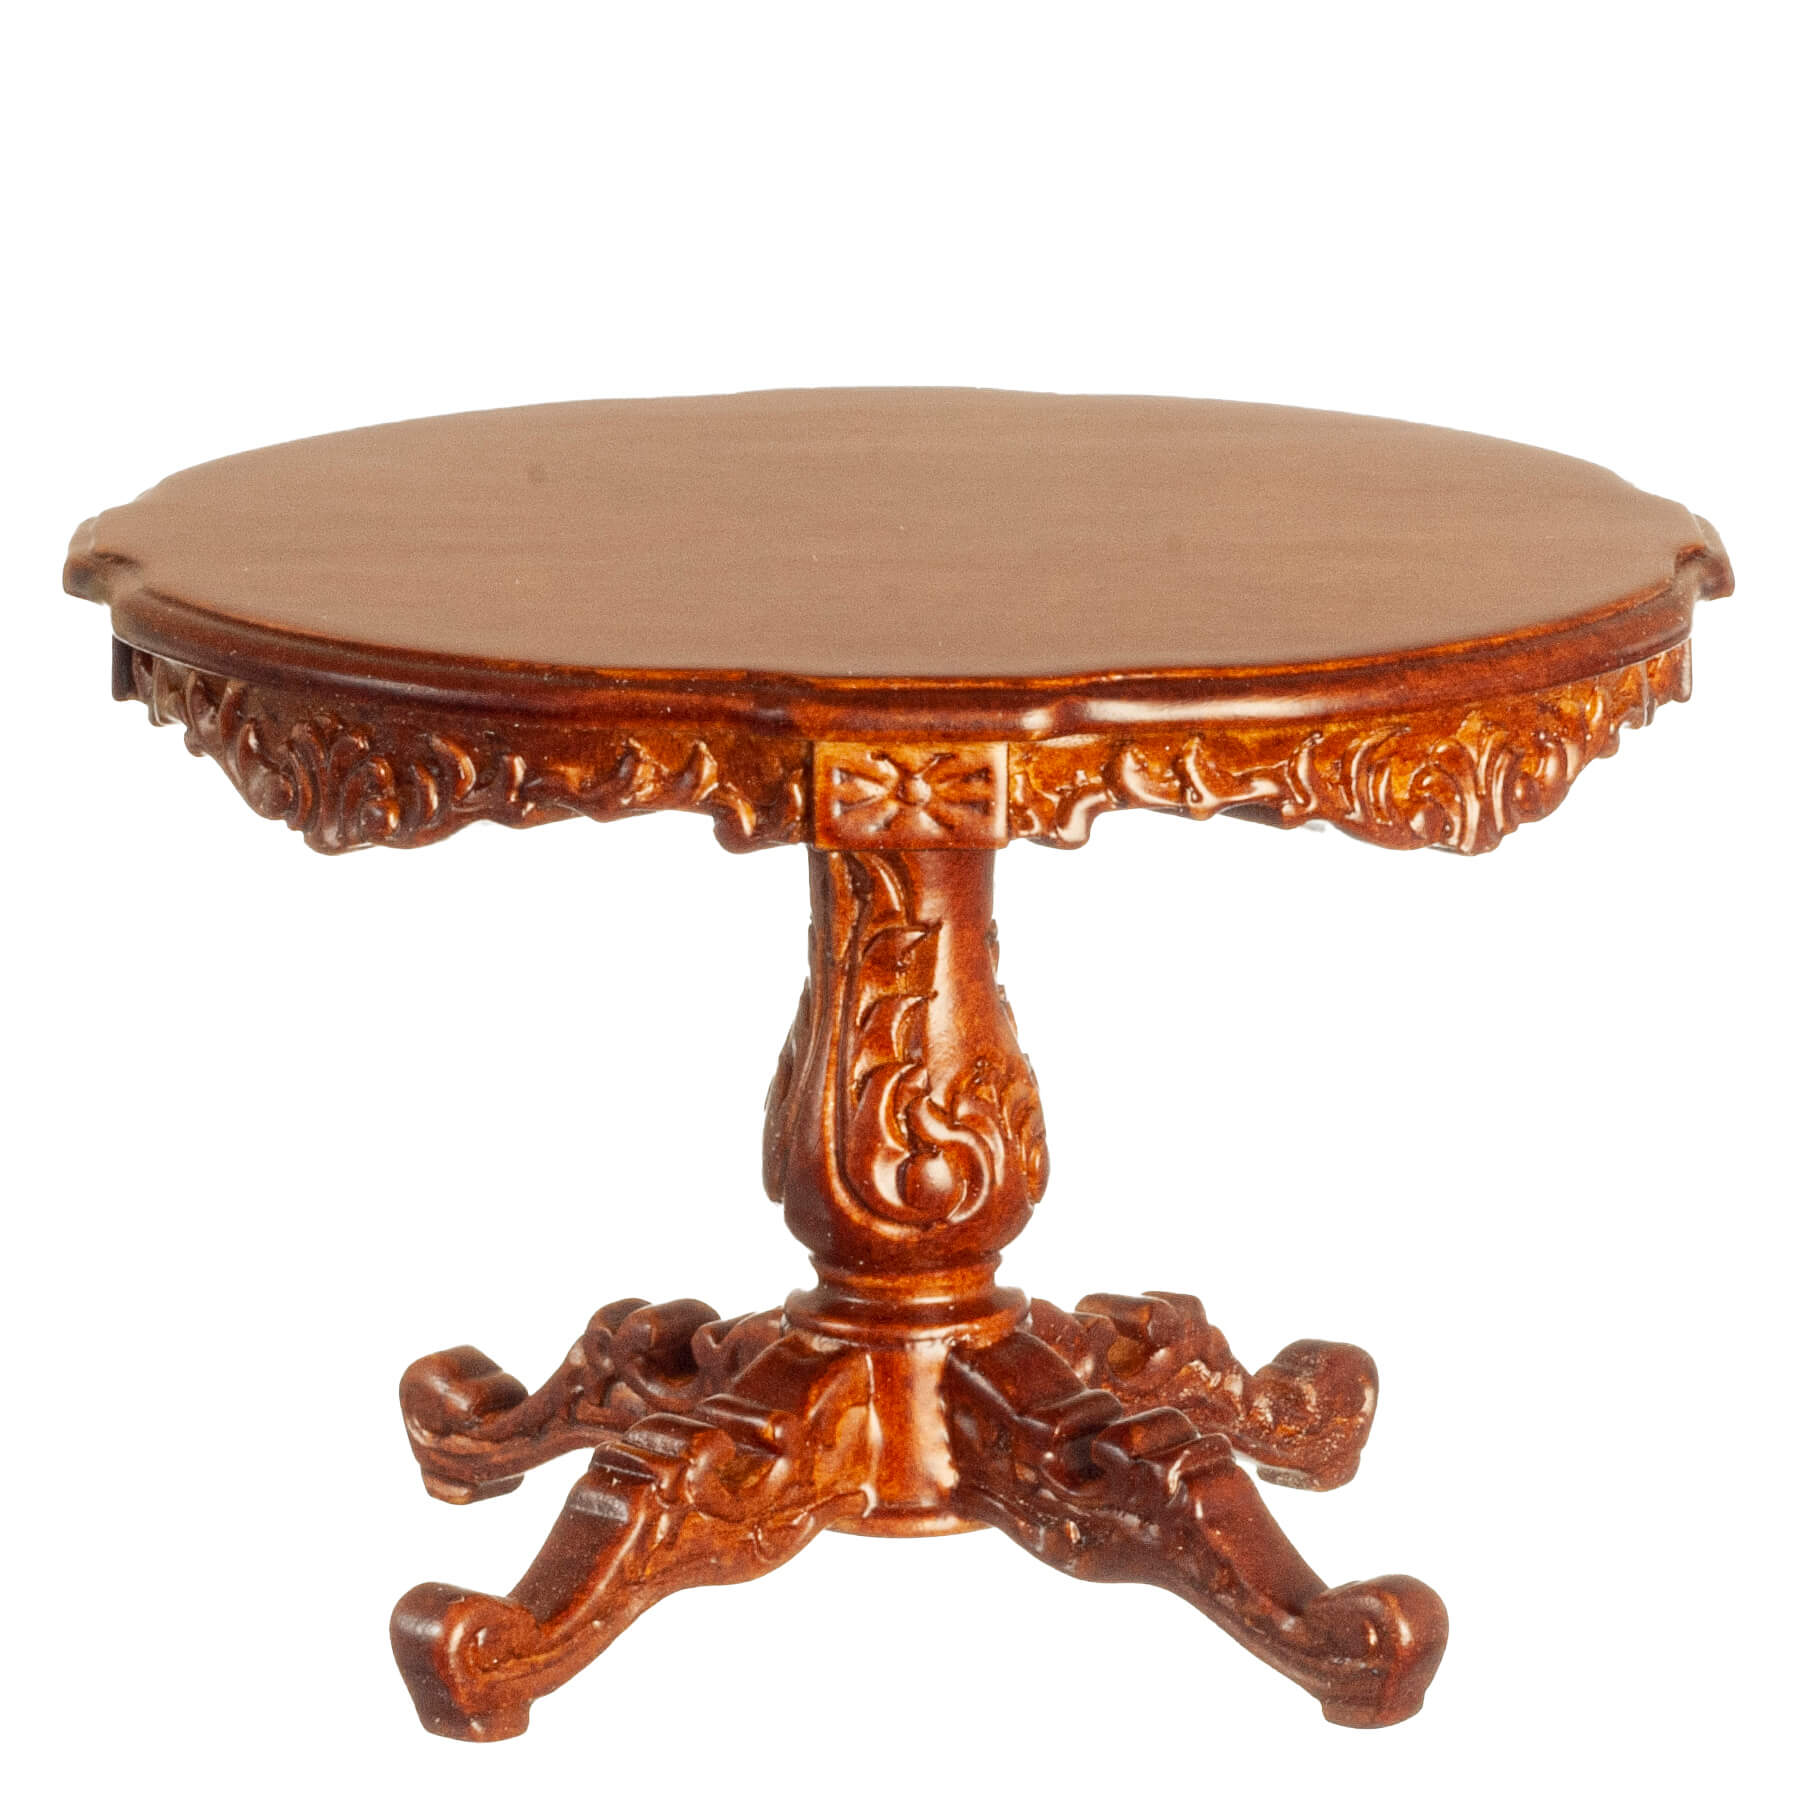 French Chateau Carved Dining Room Table - Walnut